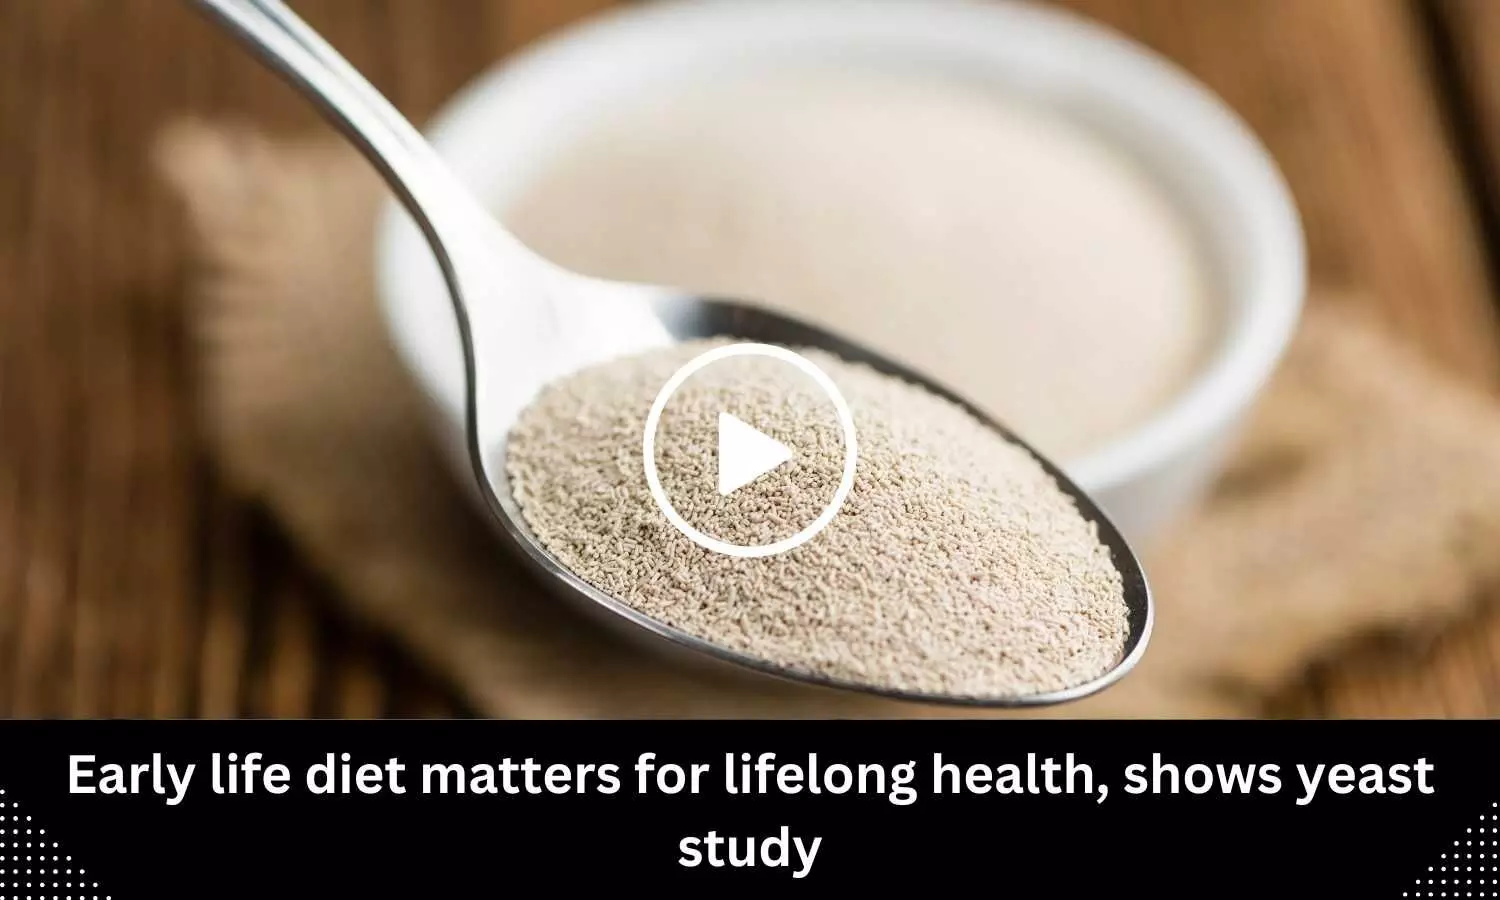 Early life diet matters for lifelong health, shows yeast study